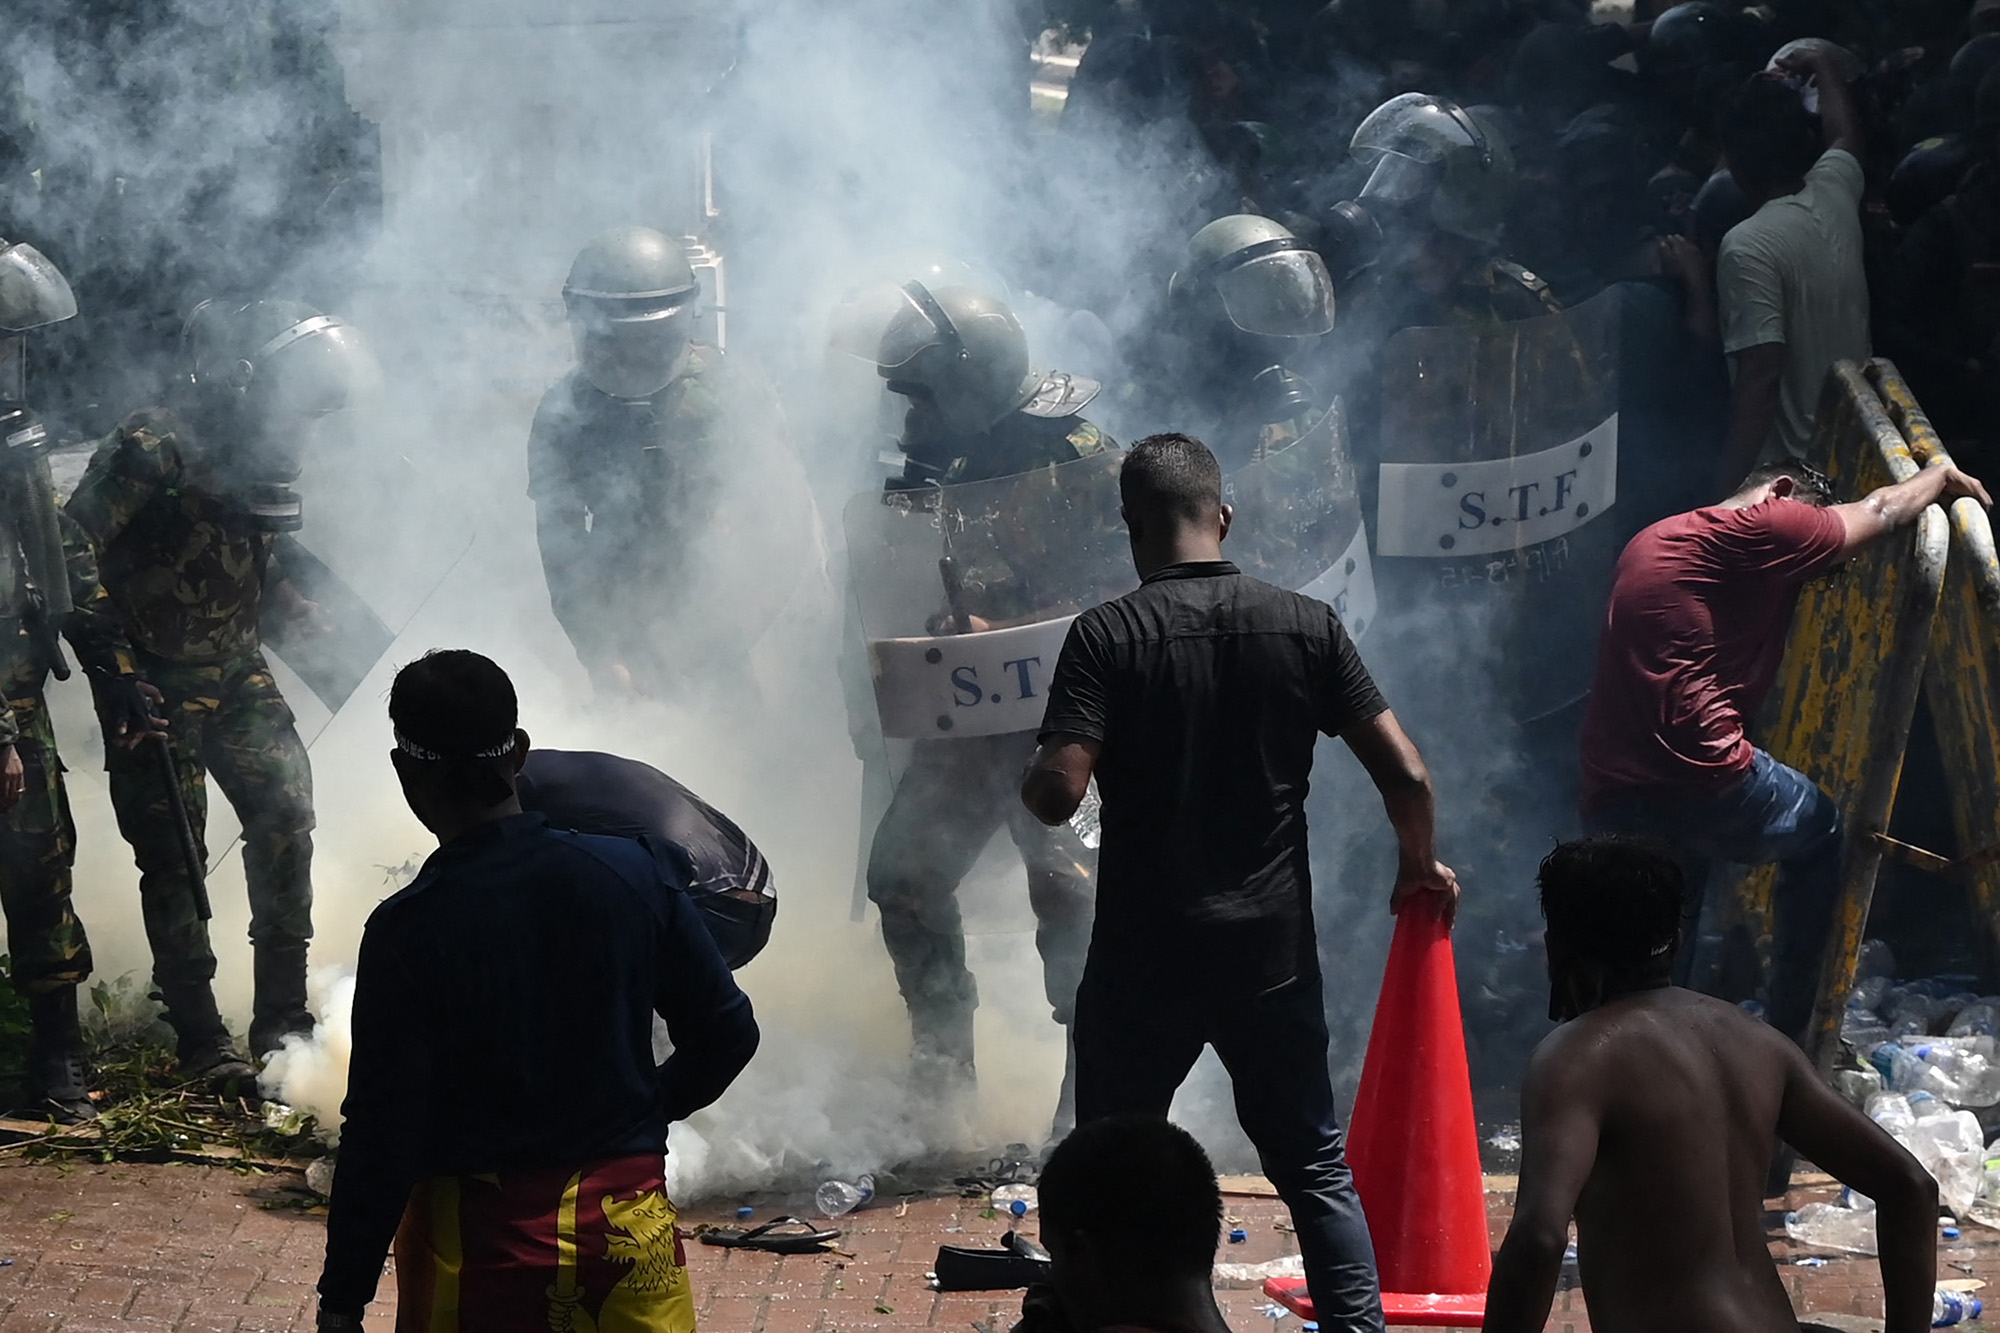 Army personnel use tear gas to disperse demonstrators during an anti-government protest outside the office of Sri Lanka's prime minister in Colombo on July 13.